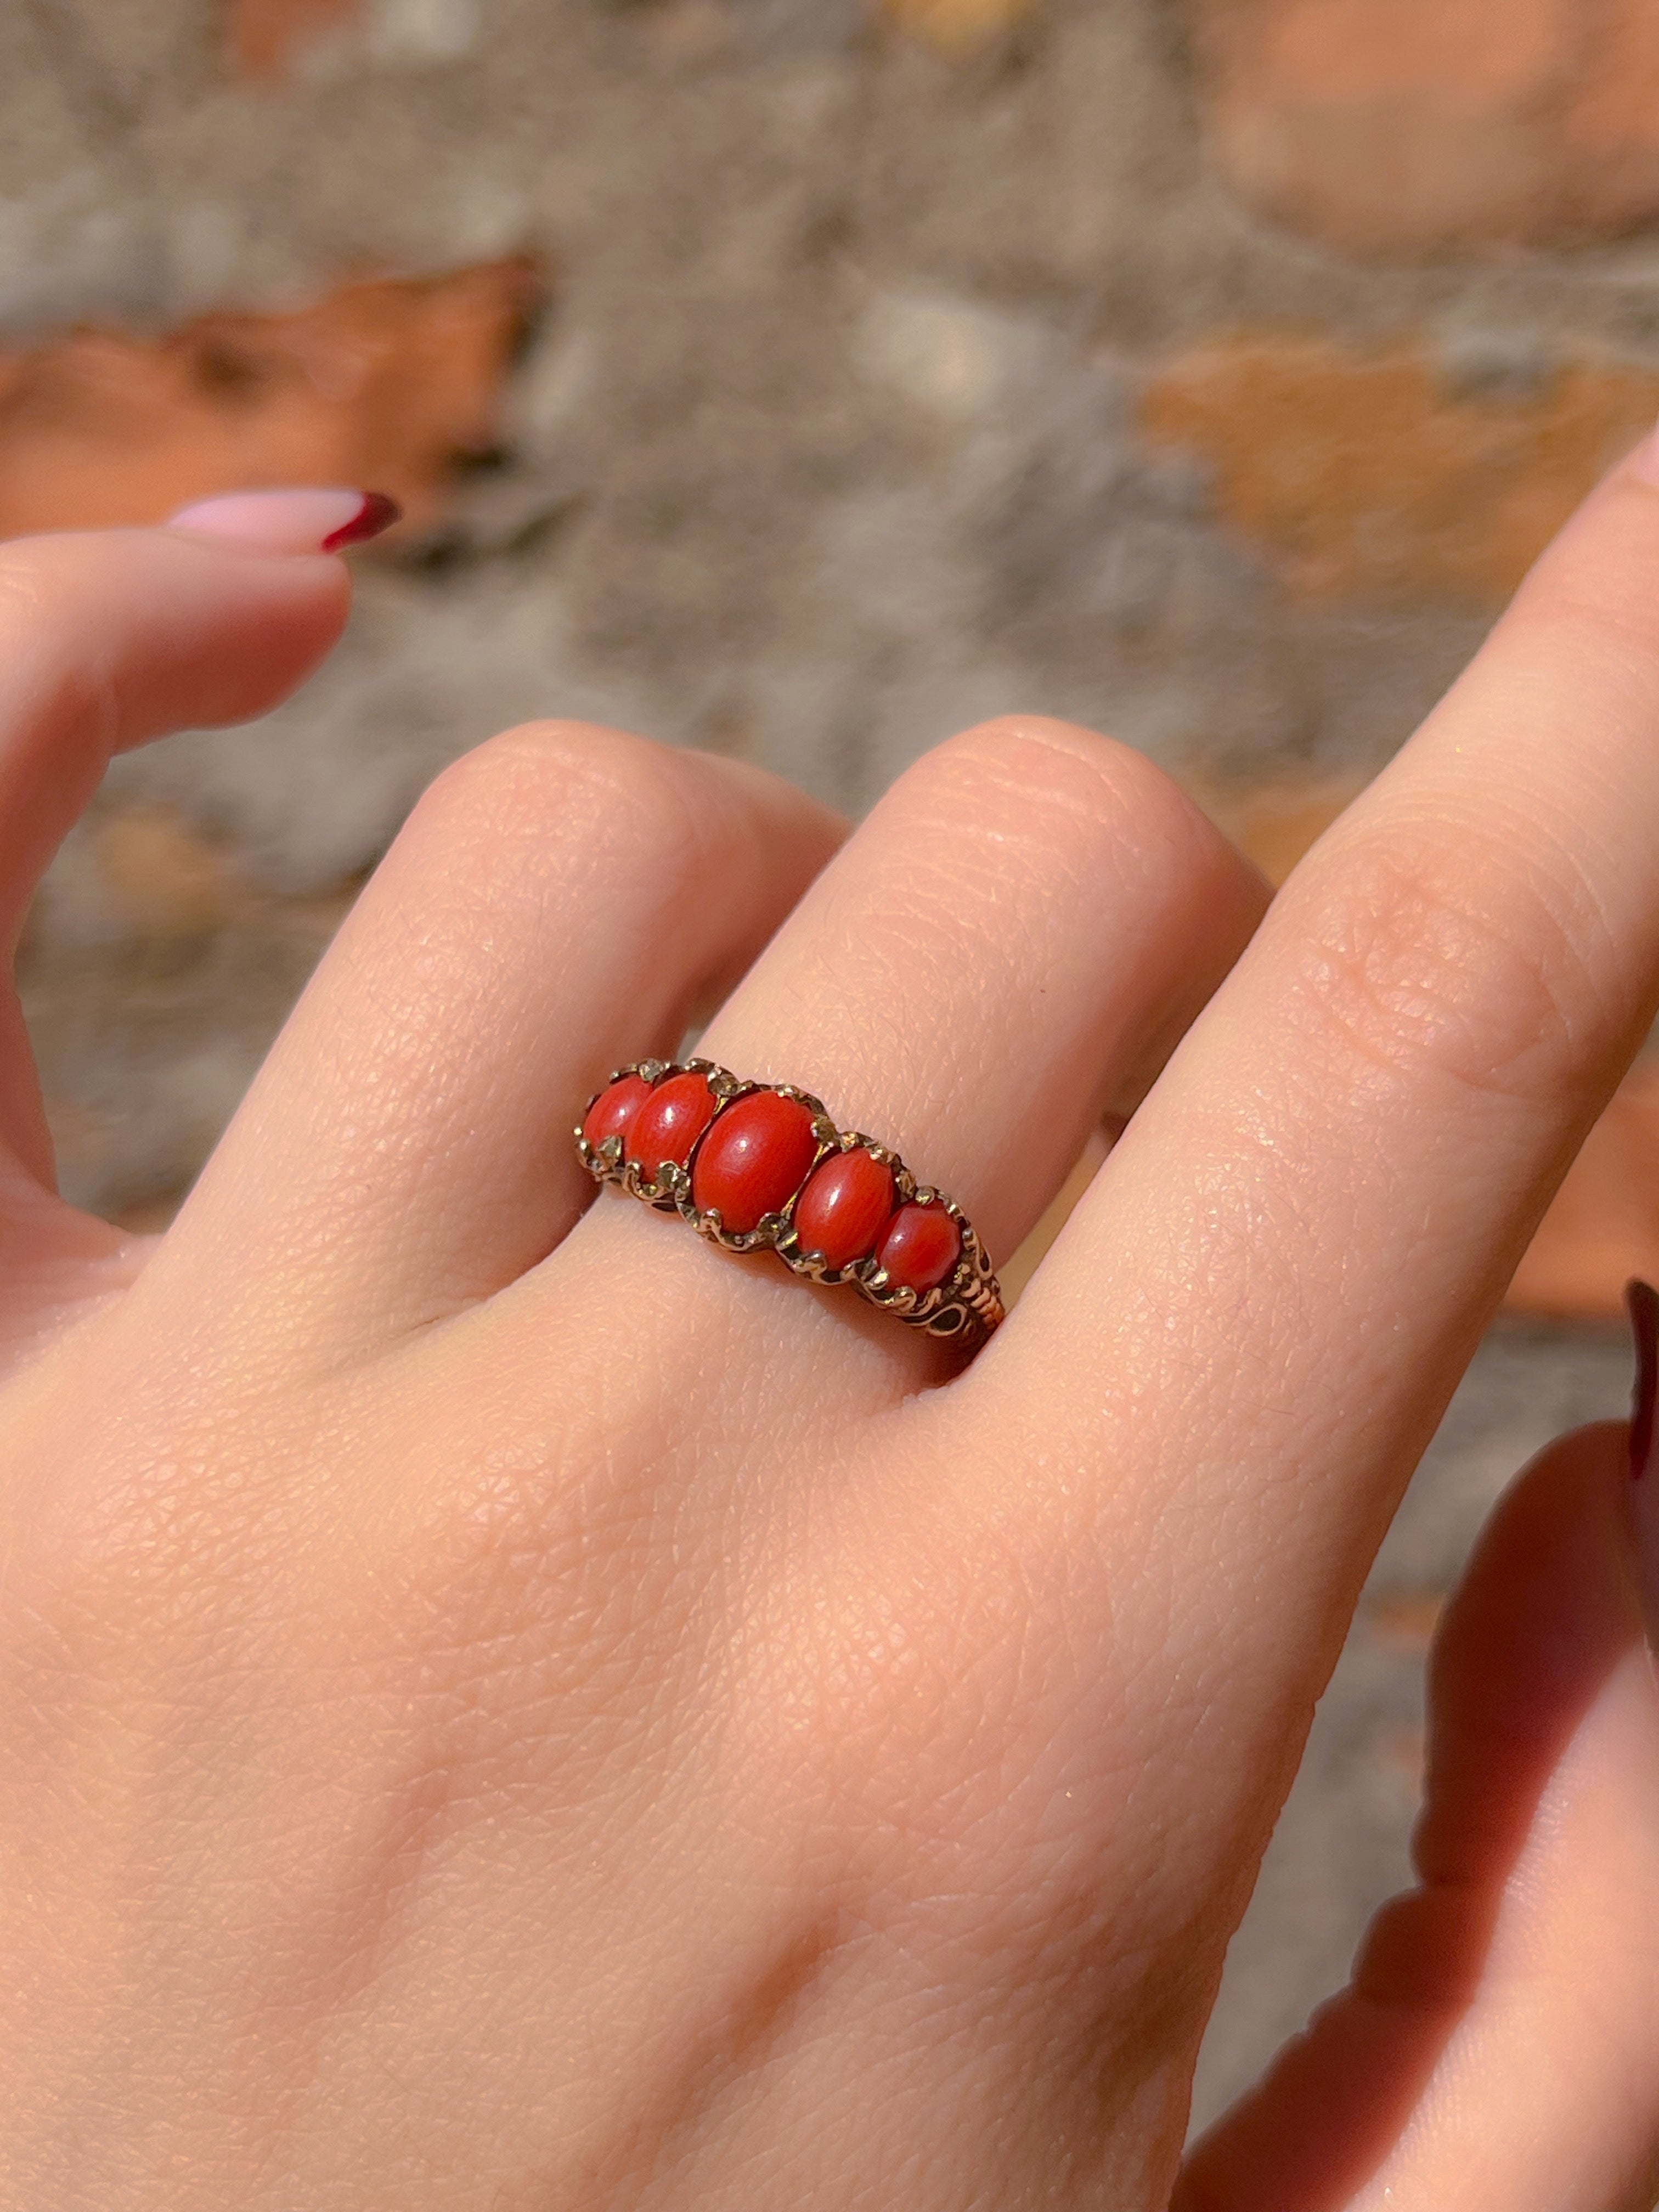 Stunning Victorian Revival Coral Ring 1957